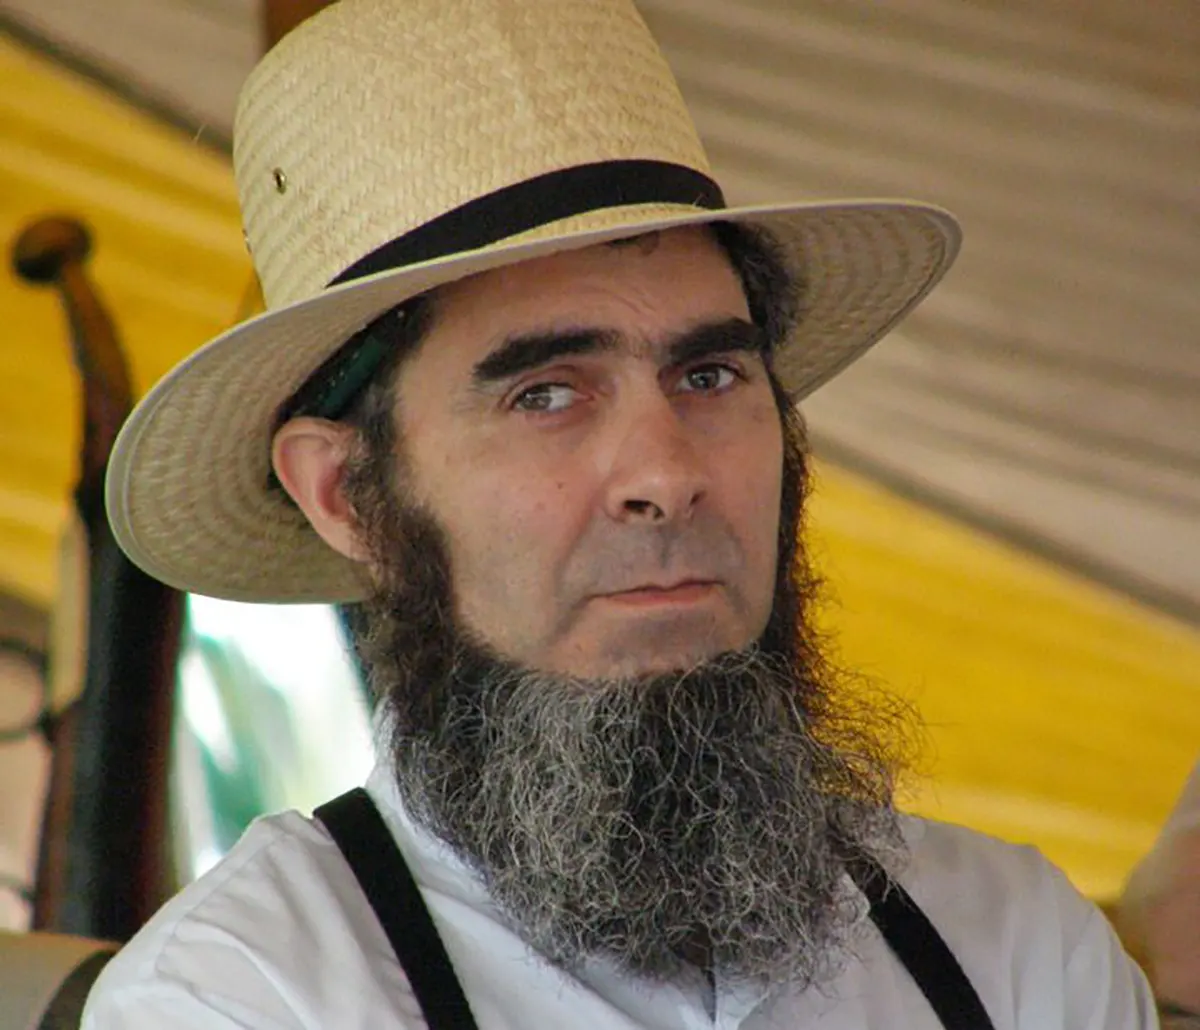 What-Is-The-Deal-With-Amish-Beards.webp